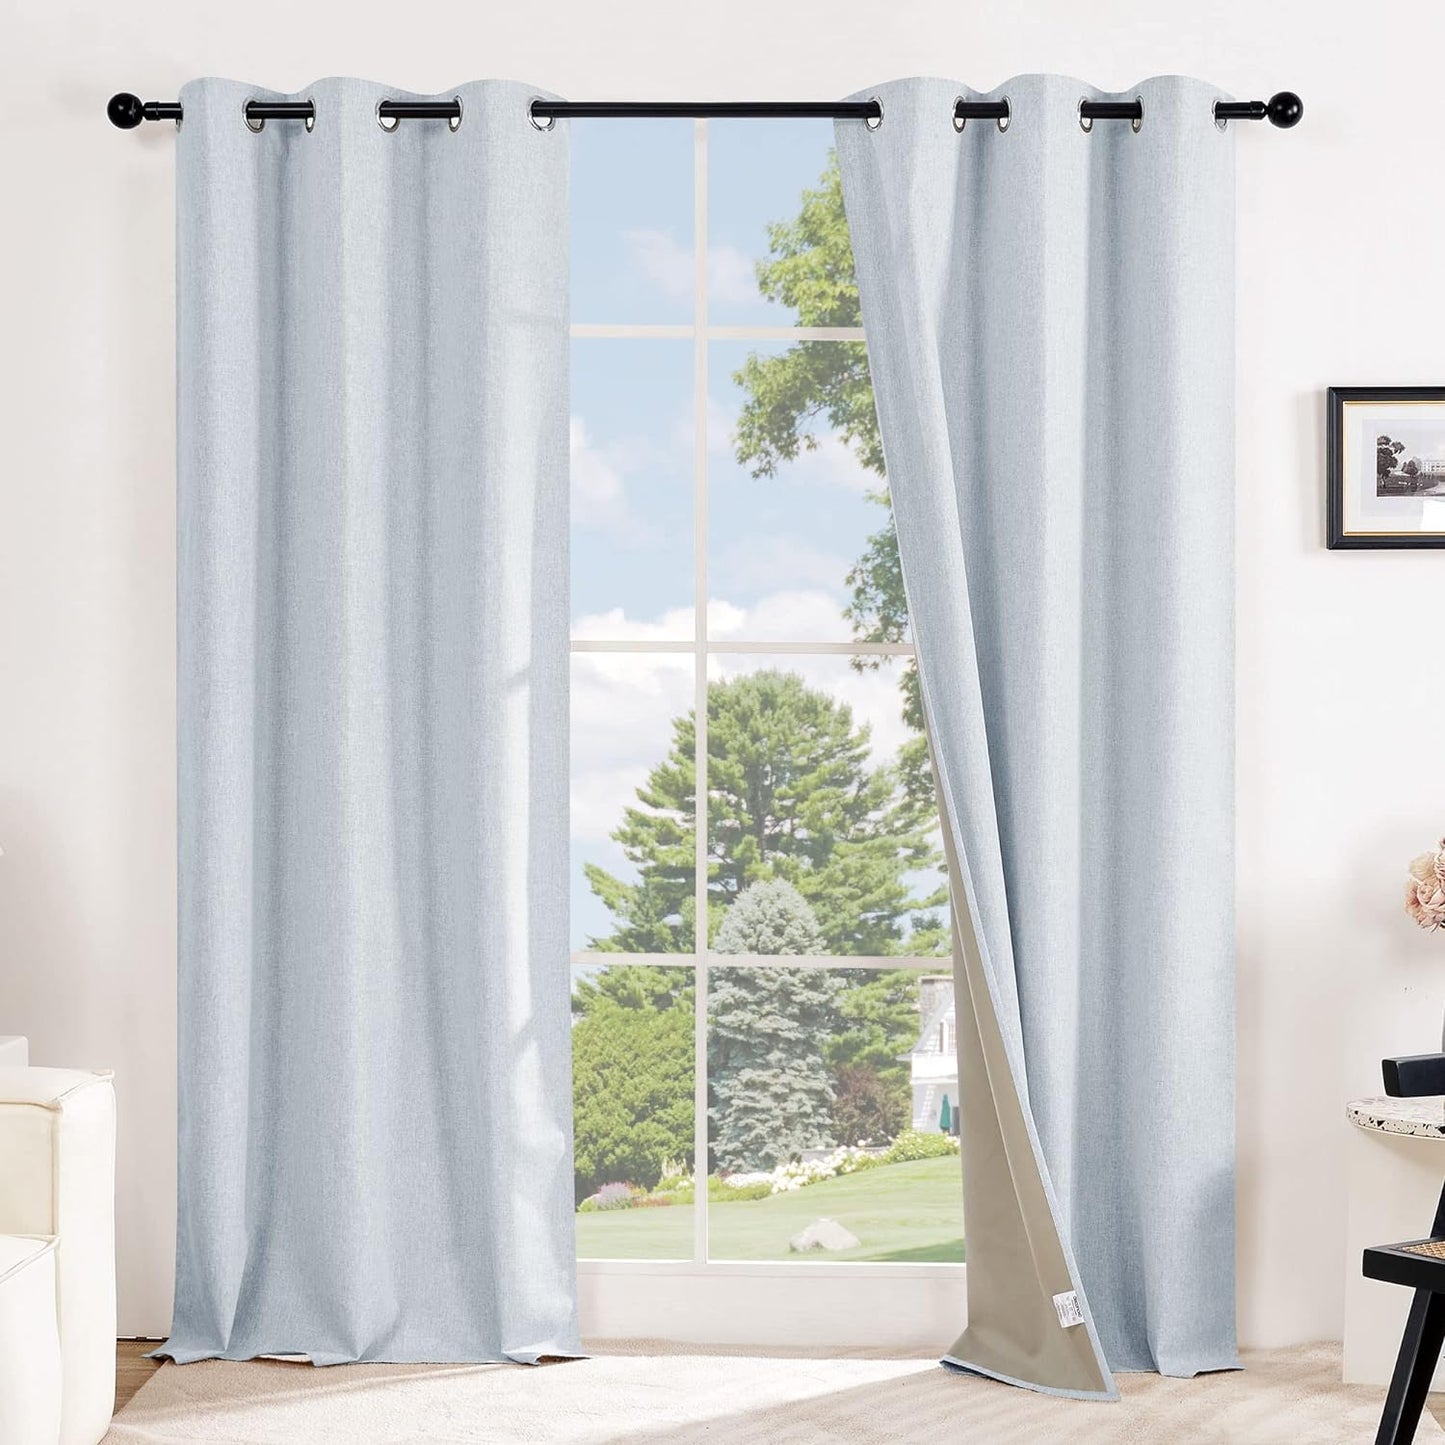 Deconovo Faux Linen Total Blackout Curtains 63 Inches Length, Light Blue, Grommet Thermal Insulated Curtain, Noise Reduction Draperies for Bedroom Living Room, 52" W X 63" L, 1 Pair  DECONOVO Light Blue 42Wx63L Inch 